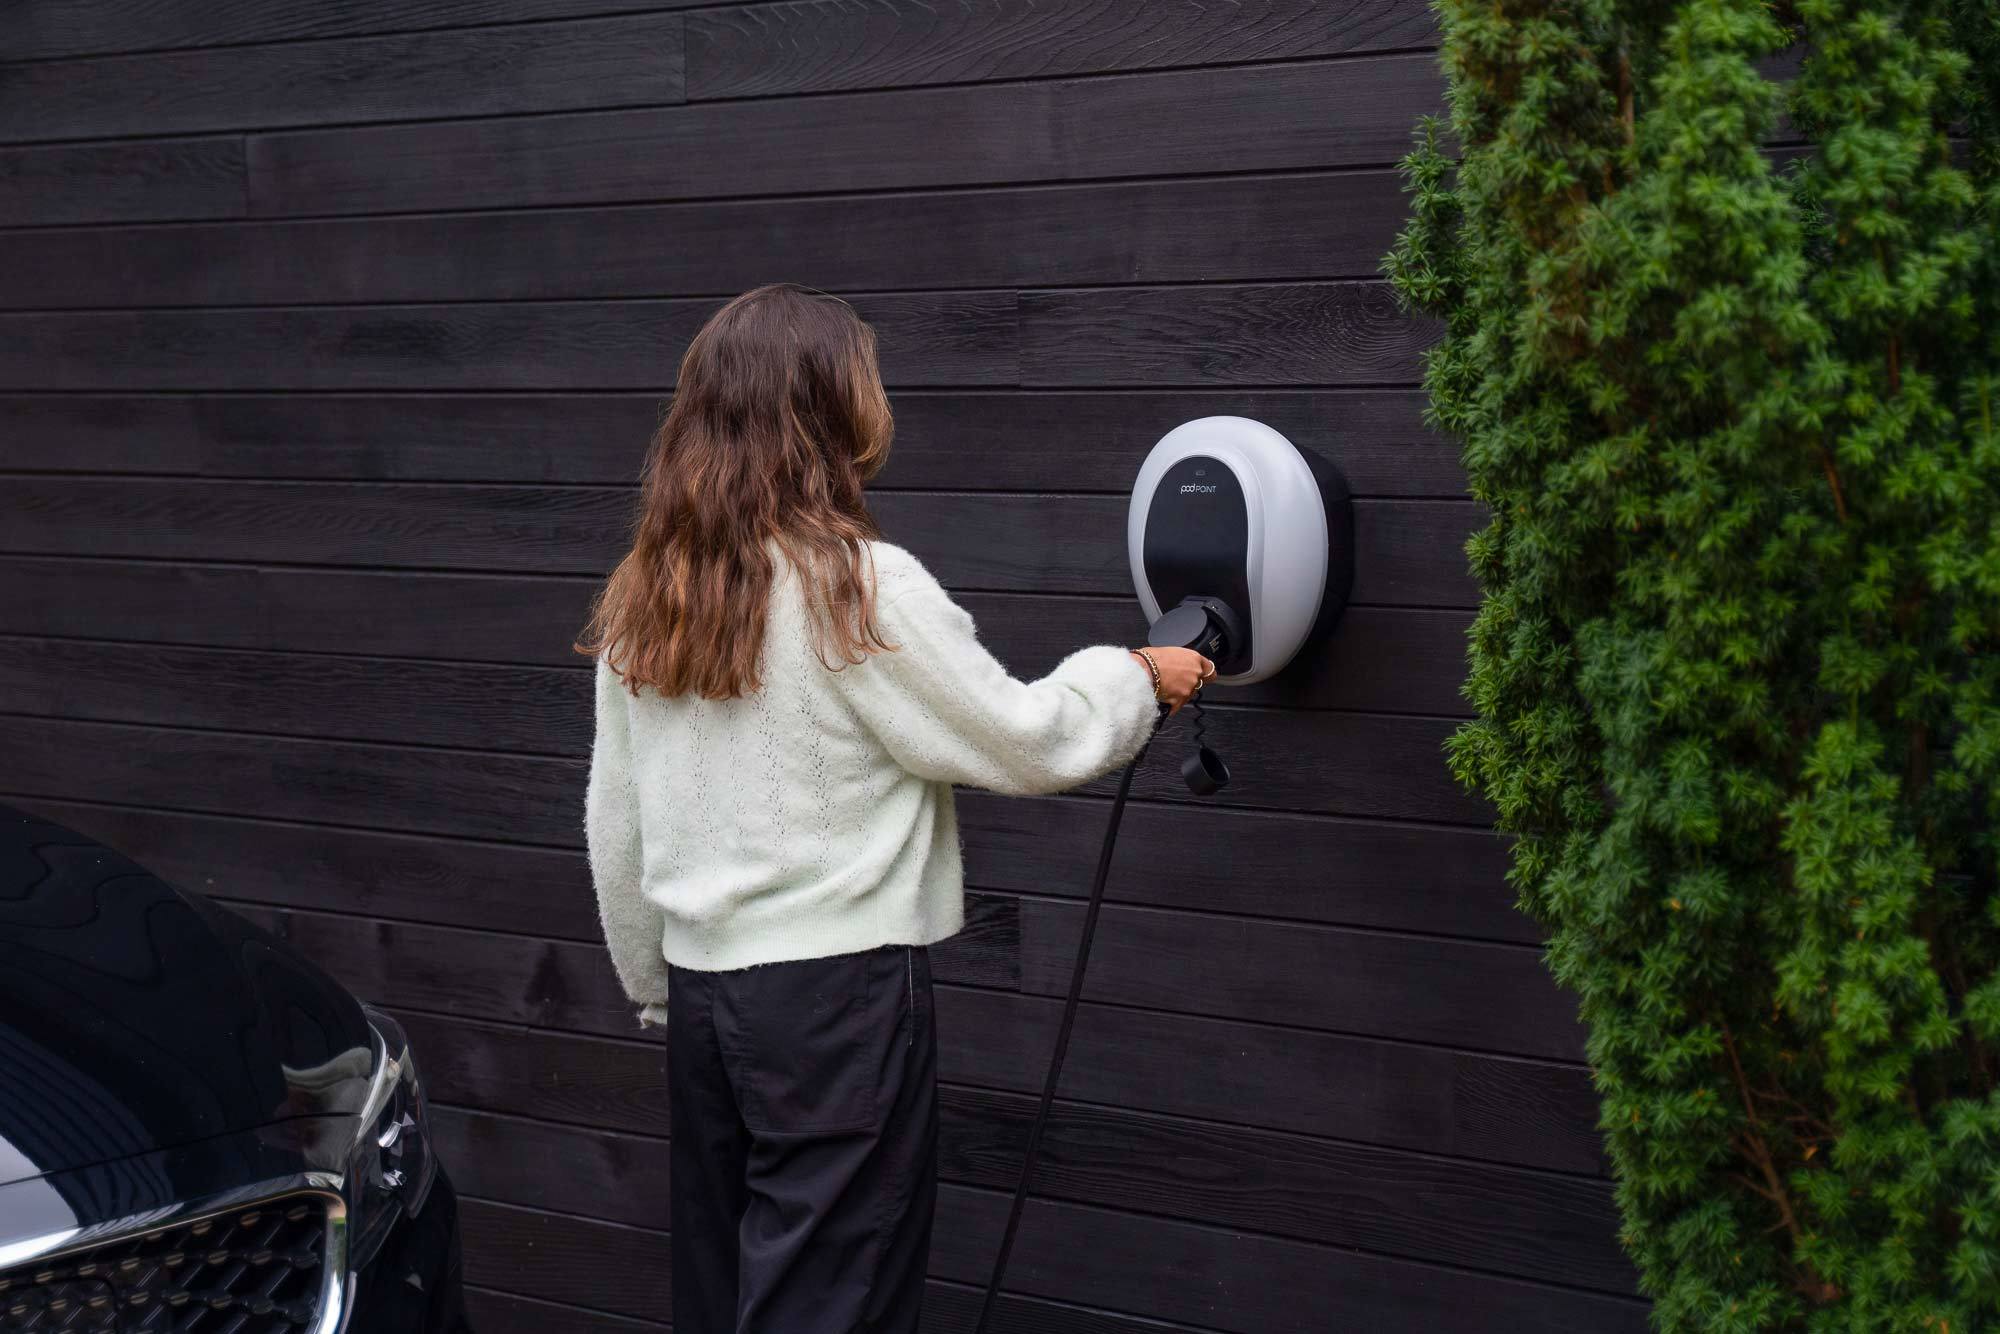 A Solo 3 installed on a black wooden wall, with a tall hedge to the right. A woman with mid-length brown hair and a white jumper is plugging a cable in to the charger, with her back to us